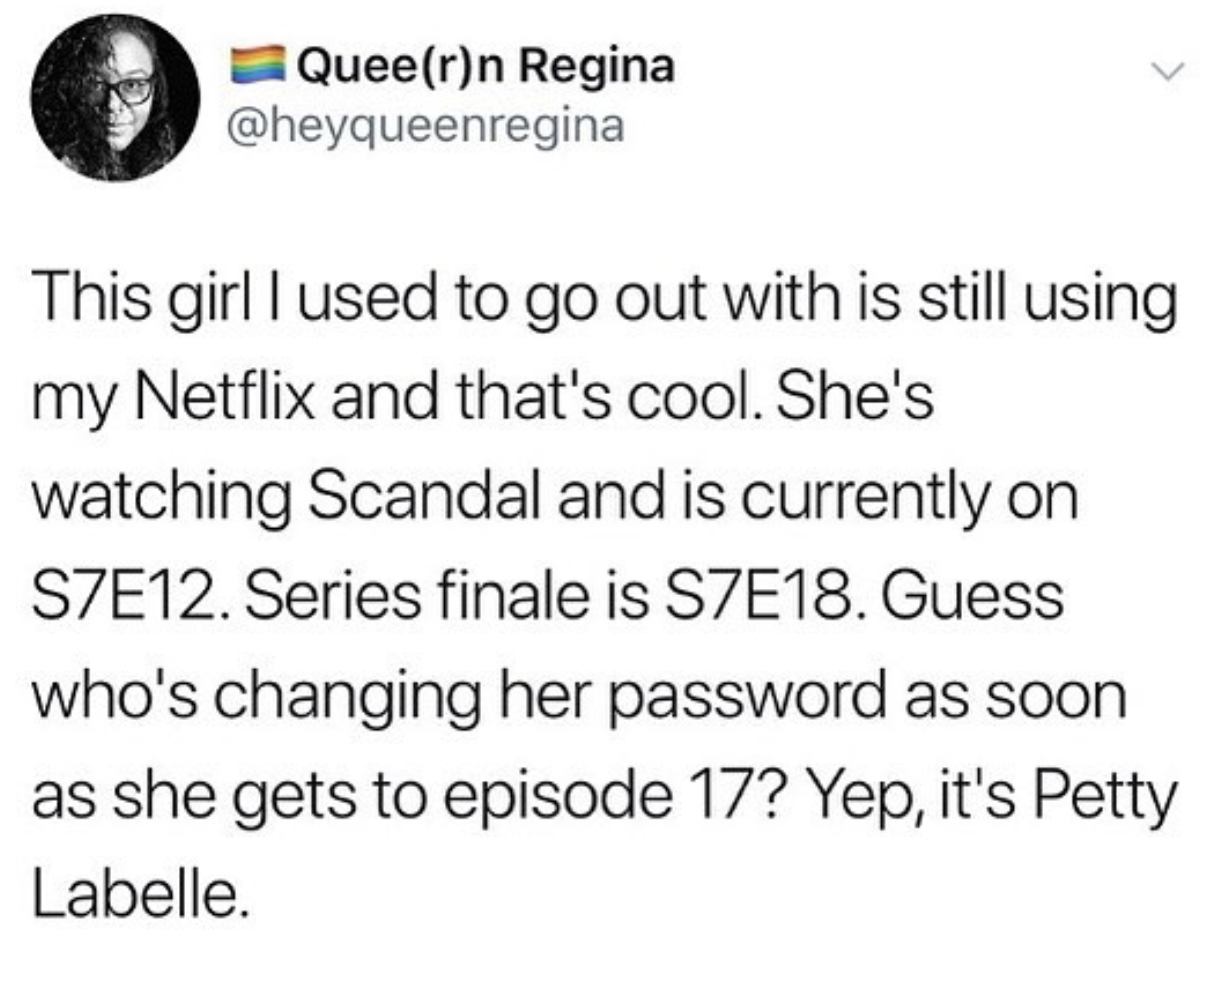 yeet i say - Queern Regina This girl I used to go out with is still using my Netflix and that's cool. She's watching Scandal and is currently on SZE12. Series finale is S7E18. Guess who's changing her password as soon as she gets to episode 17? Yep, it's 